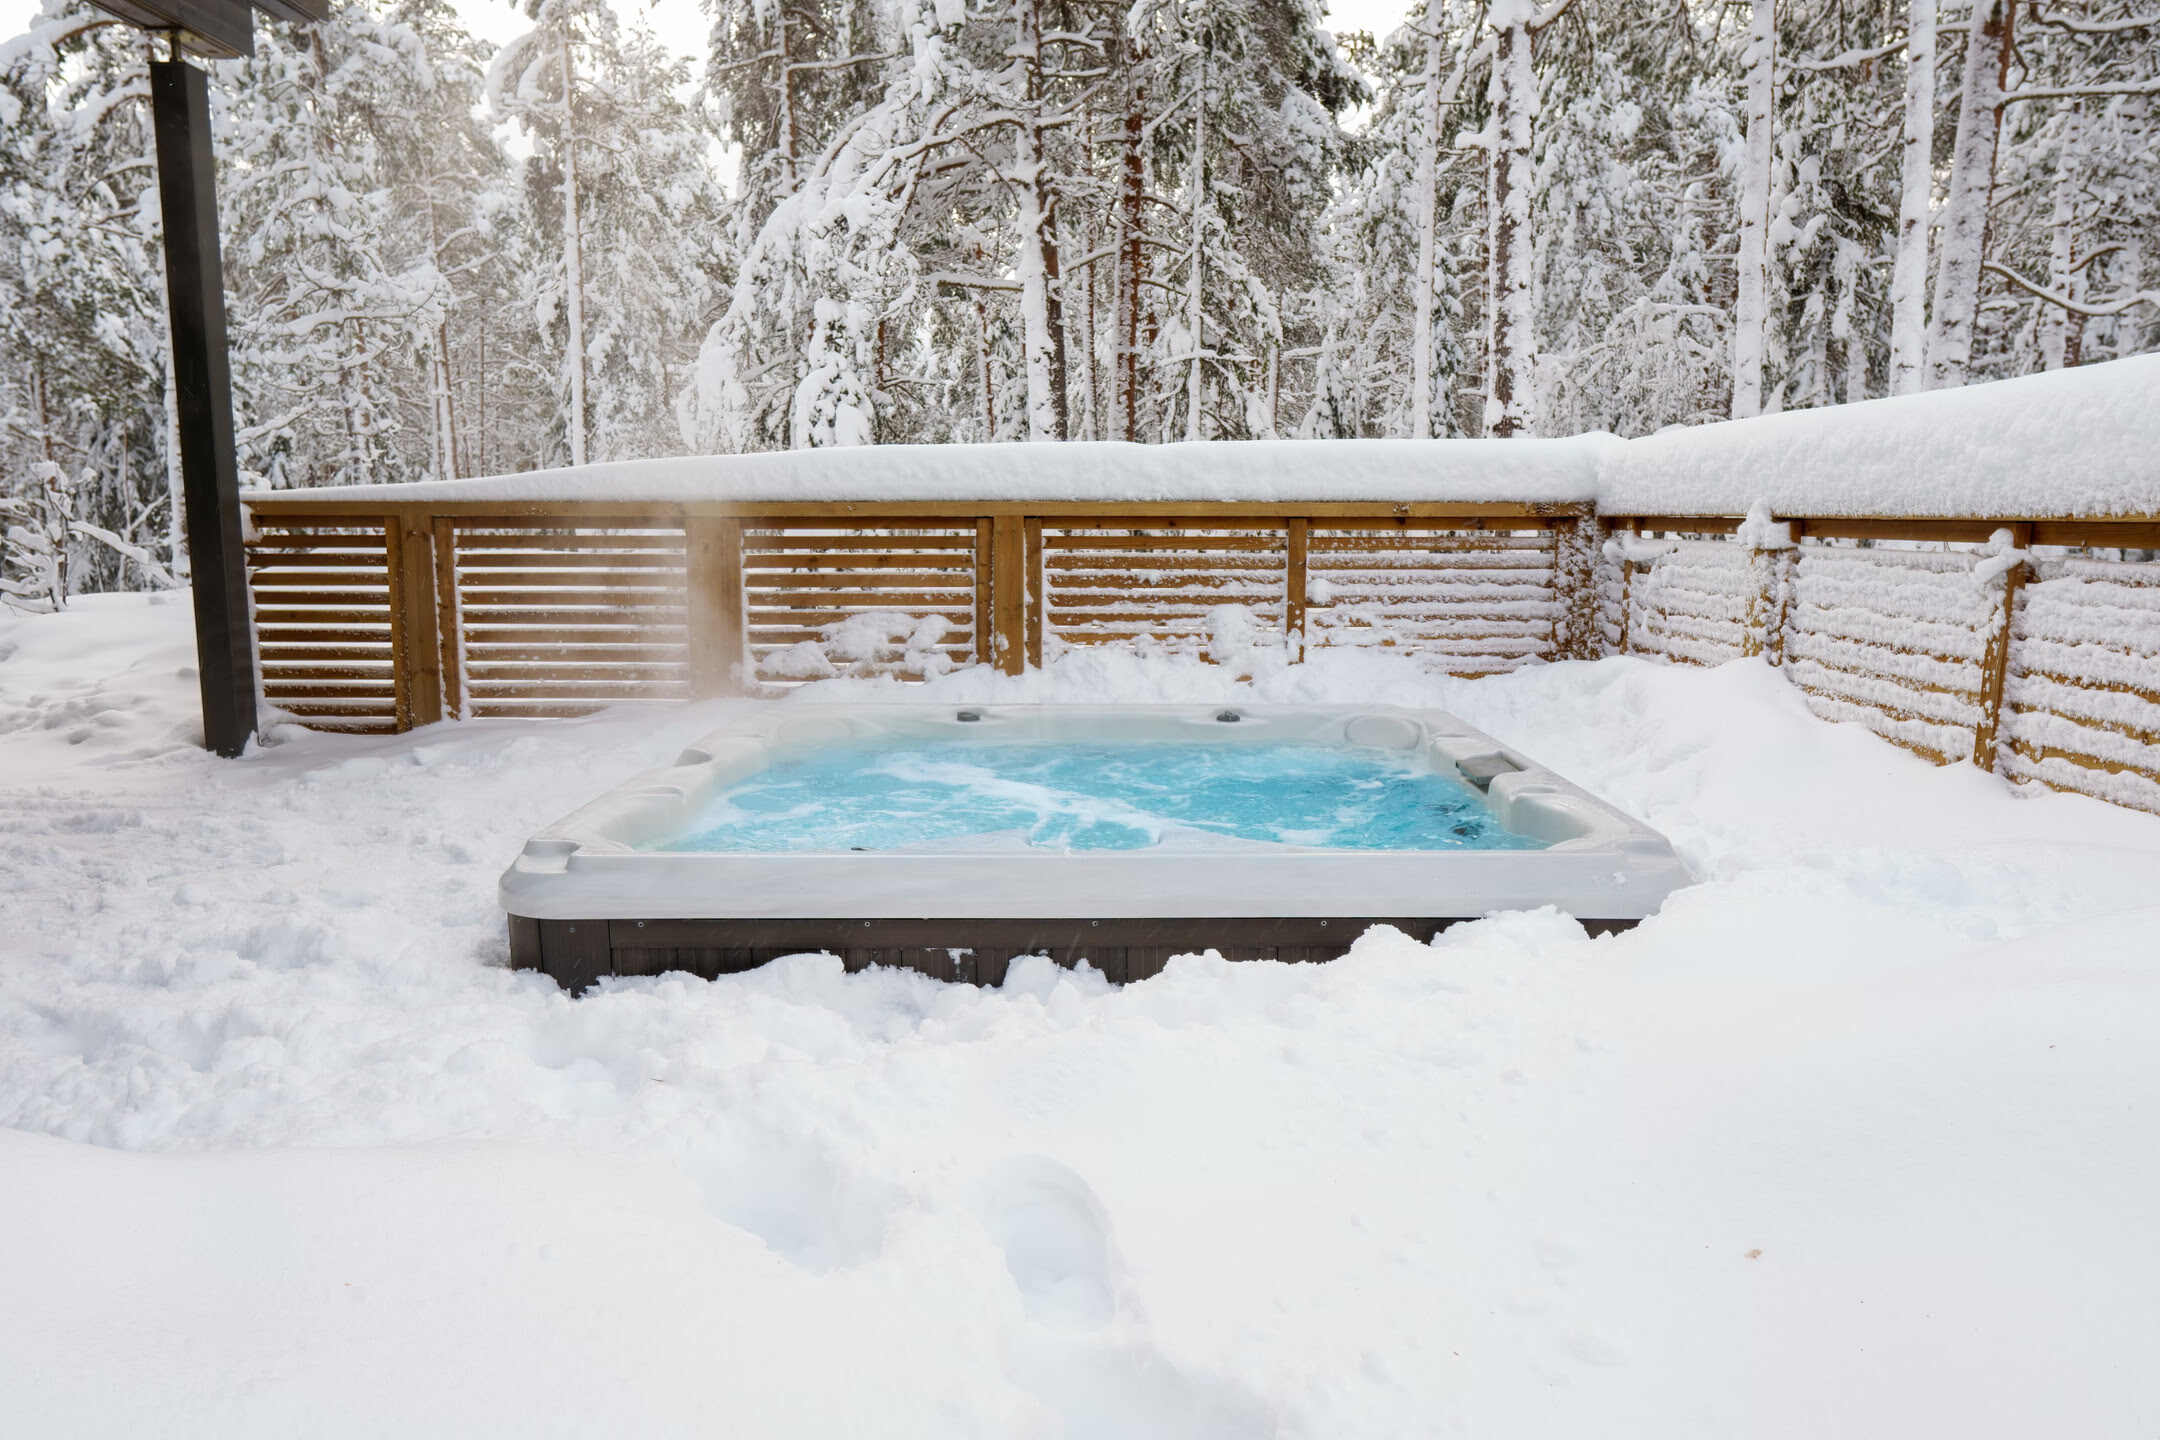 How To Winterize A Hot Tub In The Winter